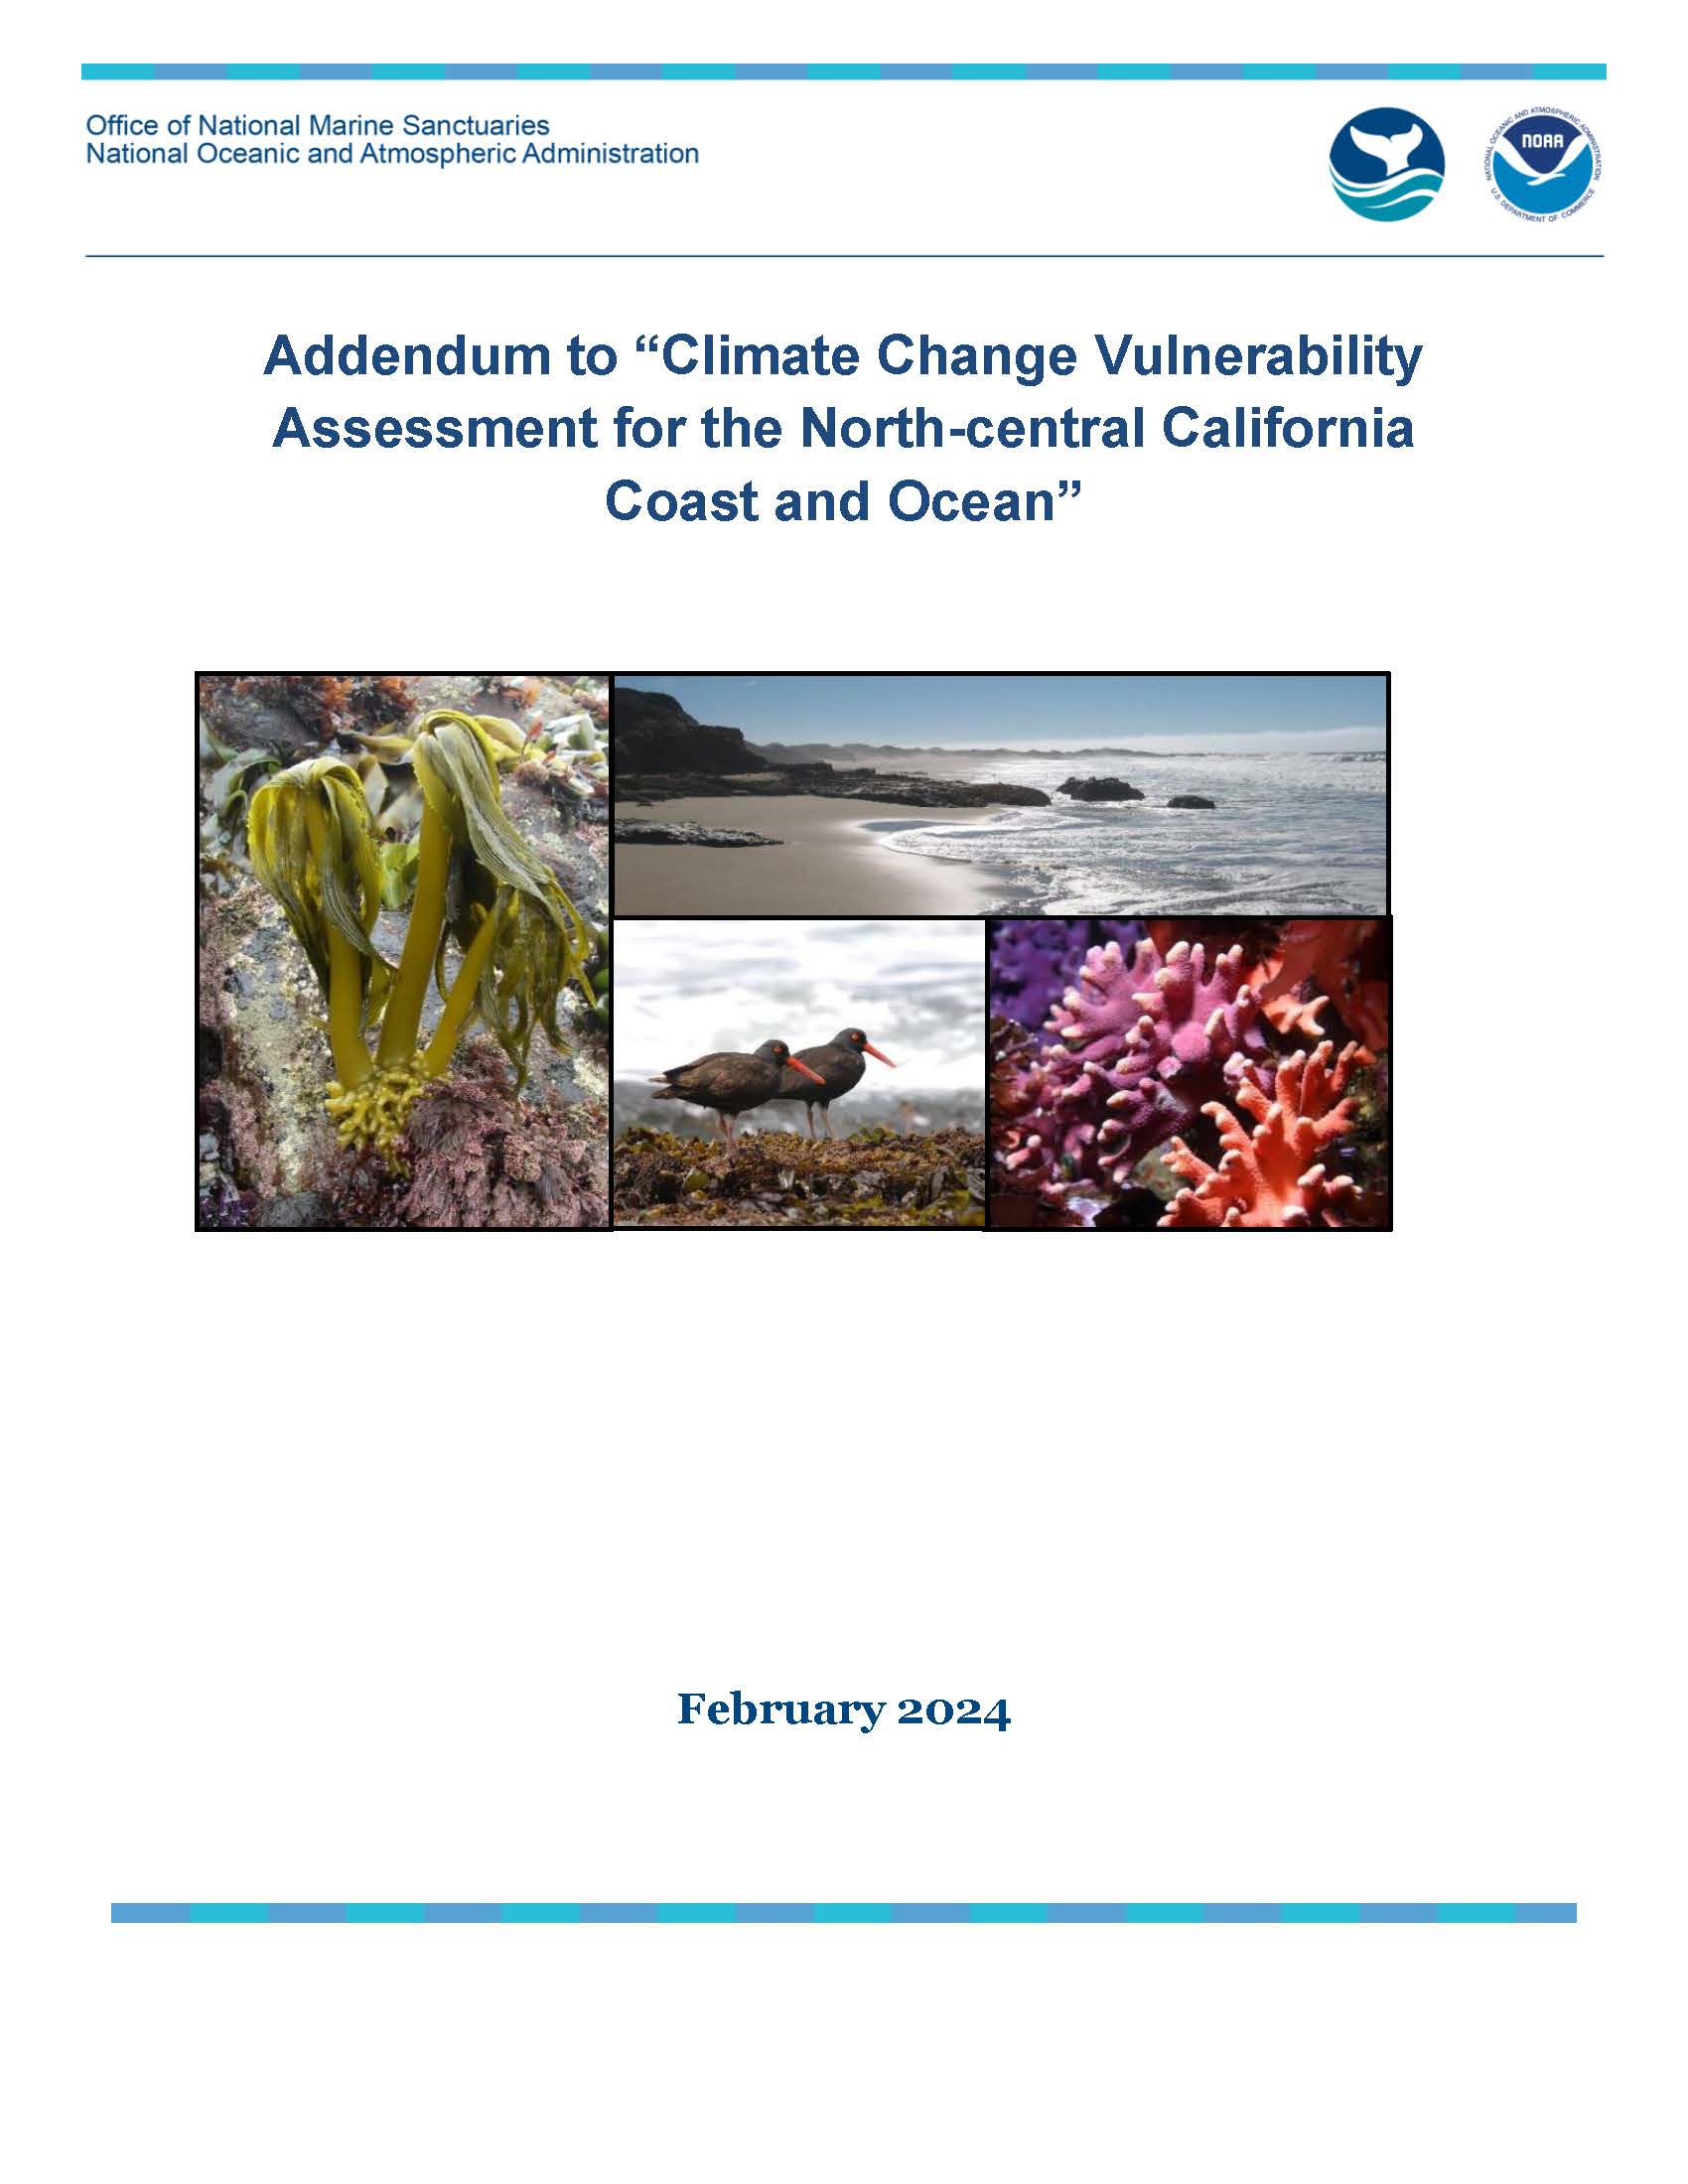 cover of document with marine life images of sea palm algae, ocean and shoreline, black oystercatcher, and pink hydrocoral